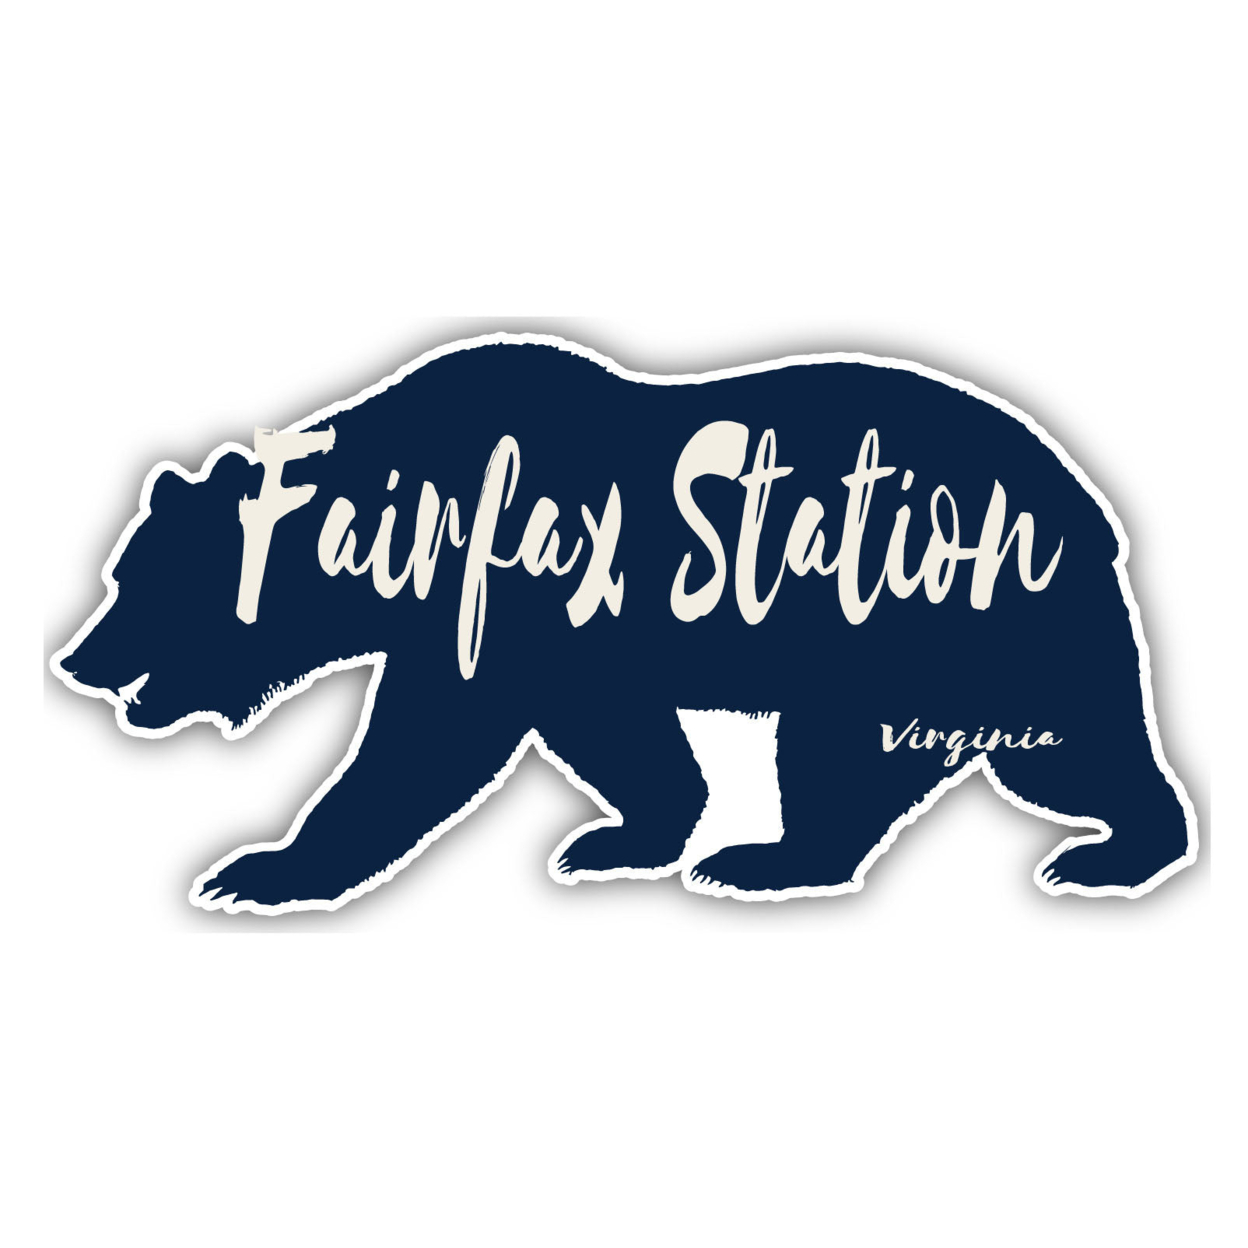 Fairfax Station Virginia Souvenir Decorative Stickers (Choose Theme And Size) - Single Unit, 6-Inch, Great Outdoors